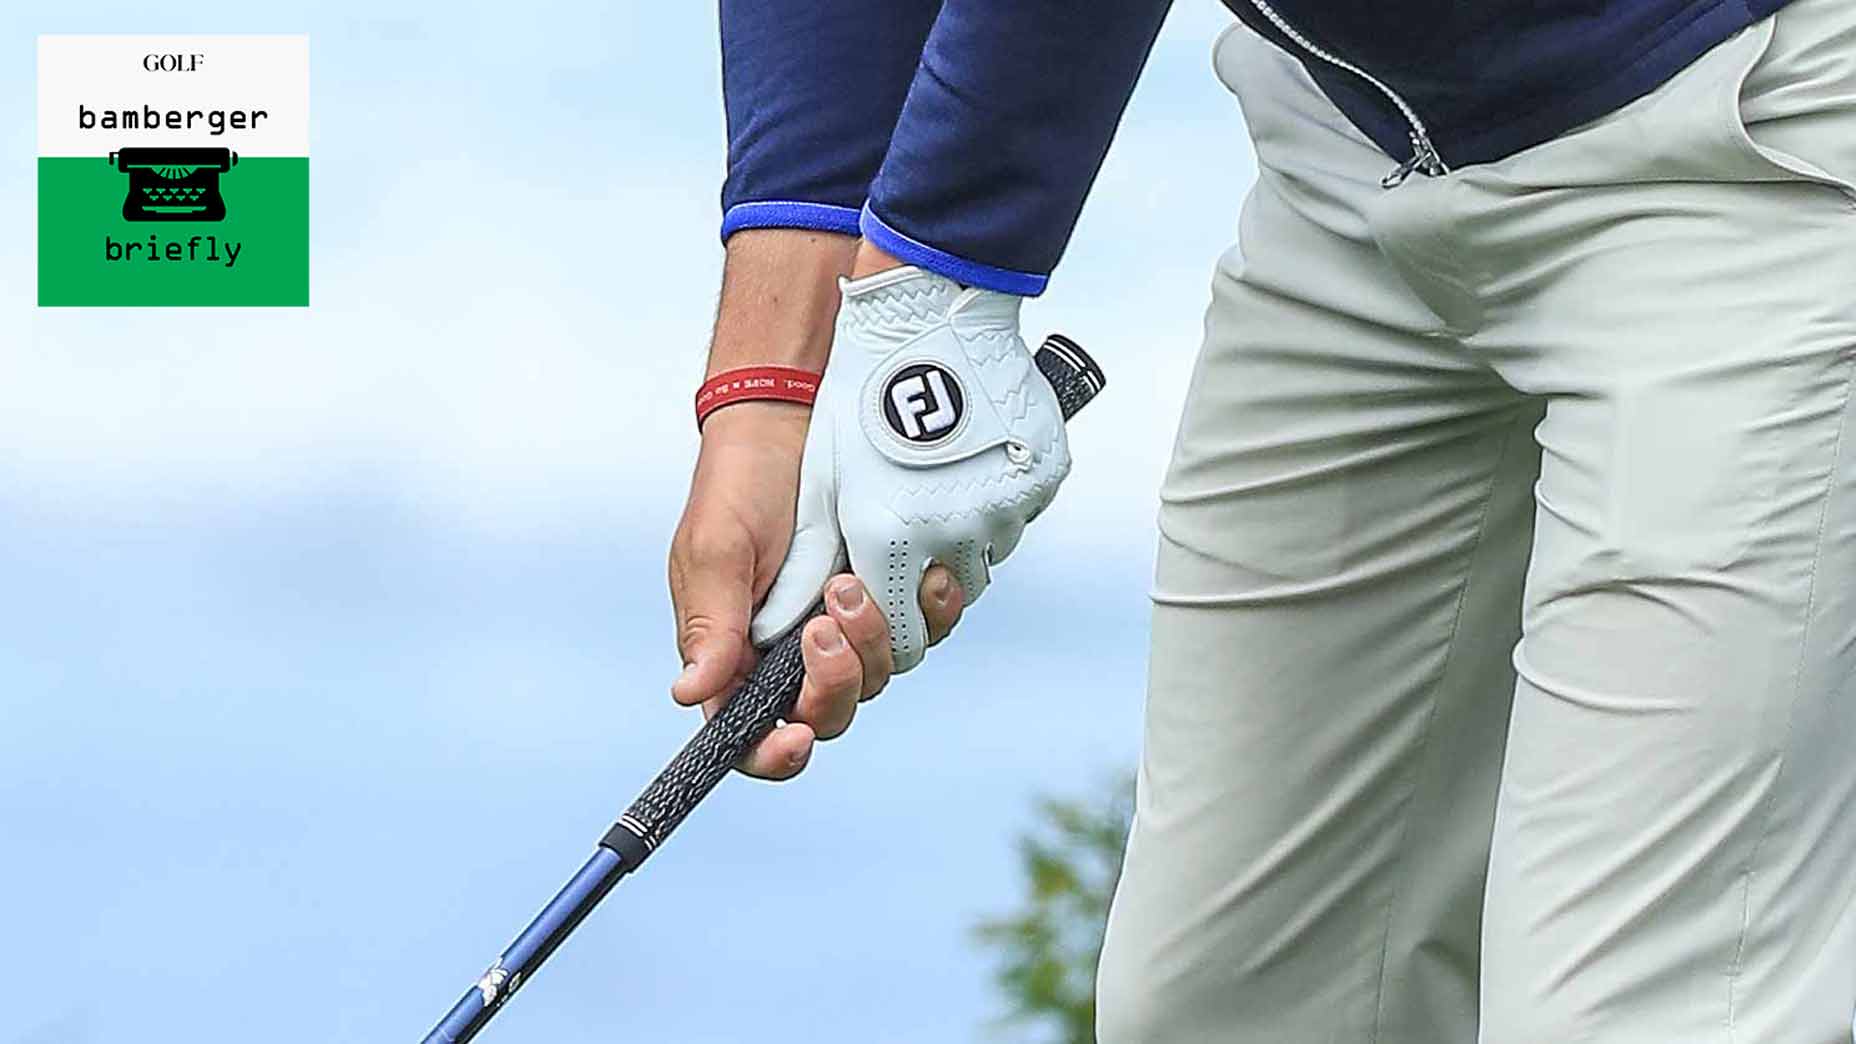 Here's why I'm adopting the Tour-approved grip-it-and-rip-it approach